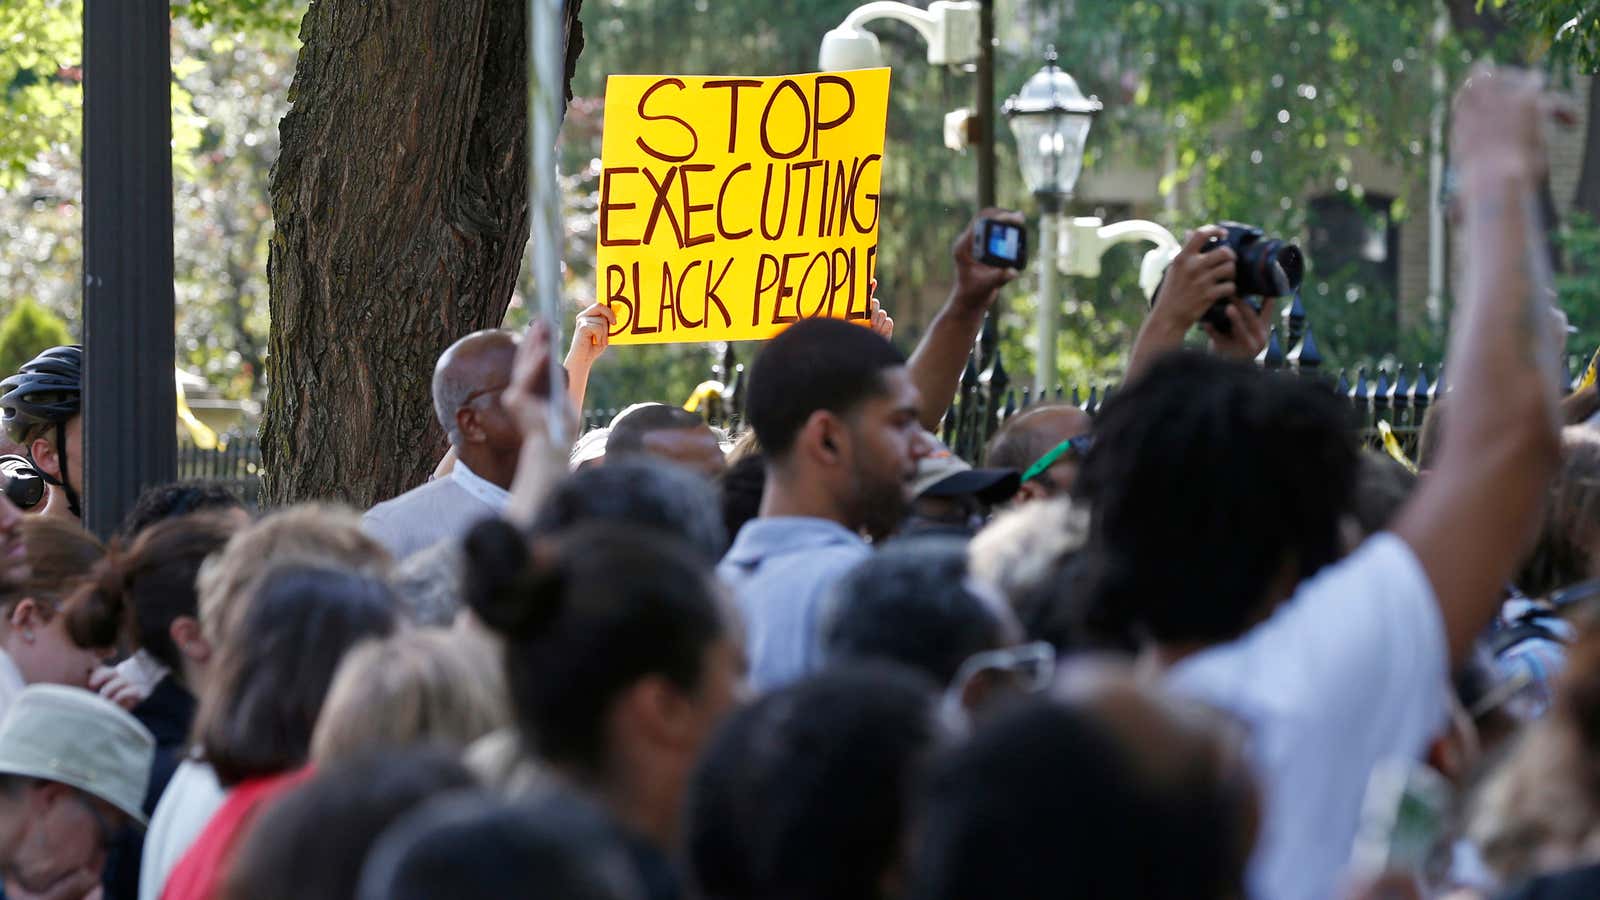 Protesters gather outside the governor’s residence in St. Paul, Minnesota, to protest the shooting death by police of Philando Castile.